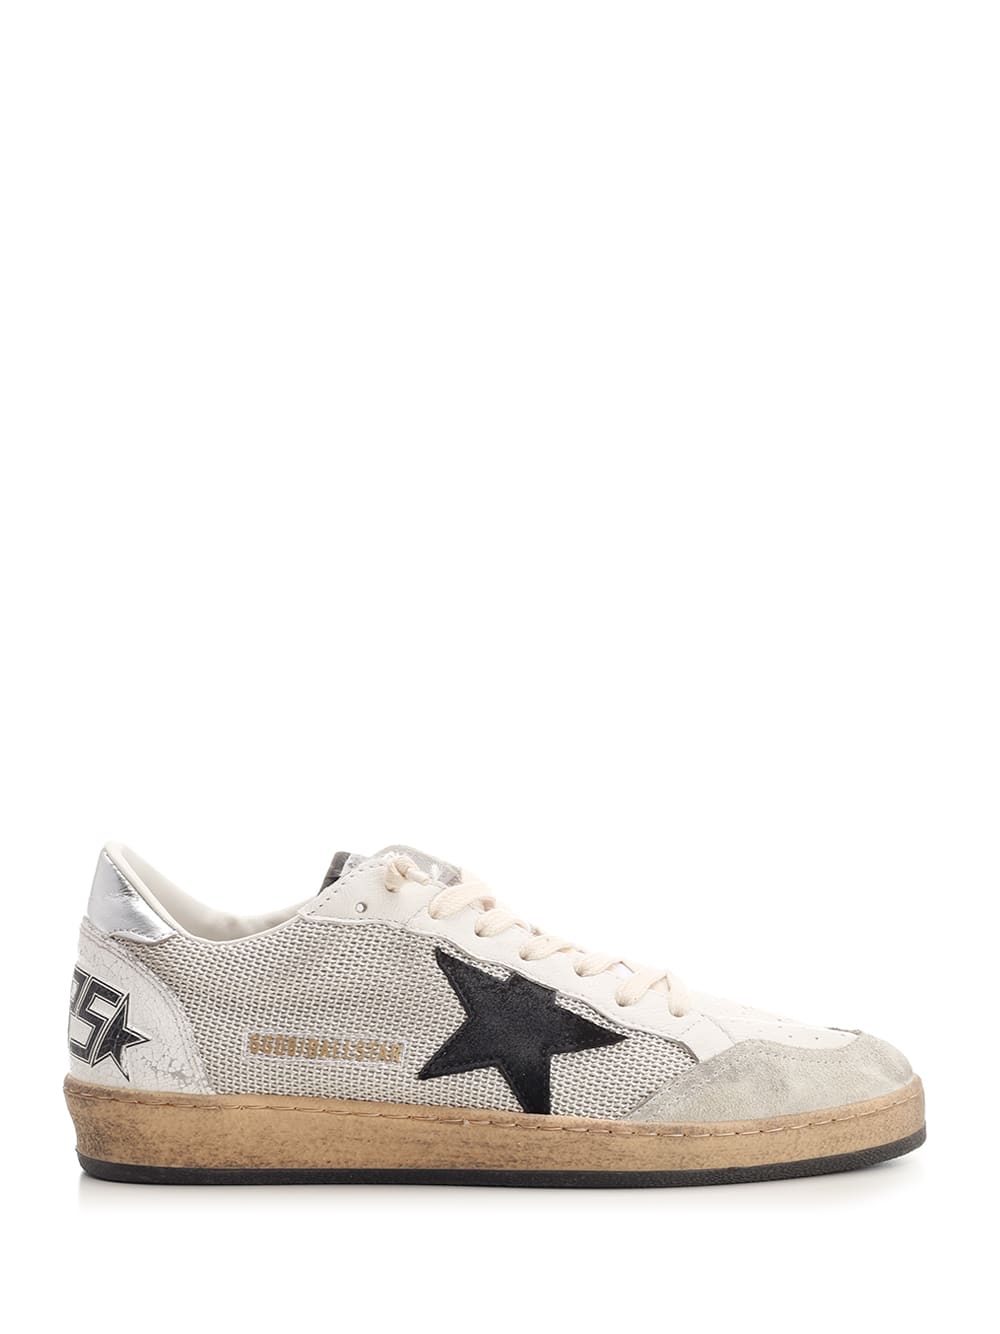 Golden Goose Ball Star Sneakers In Neutral